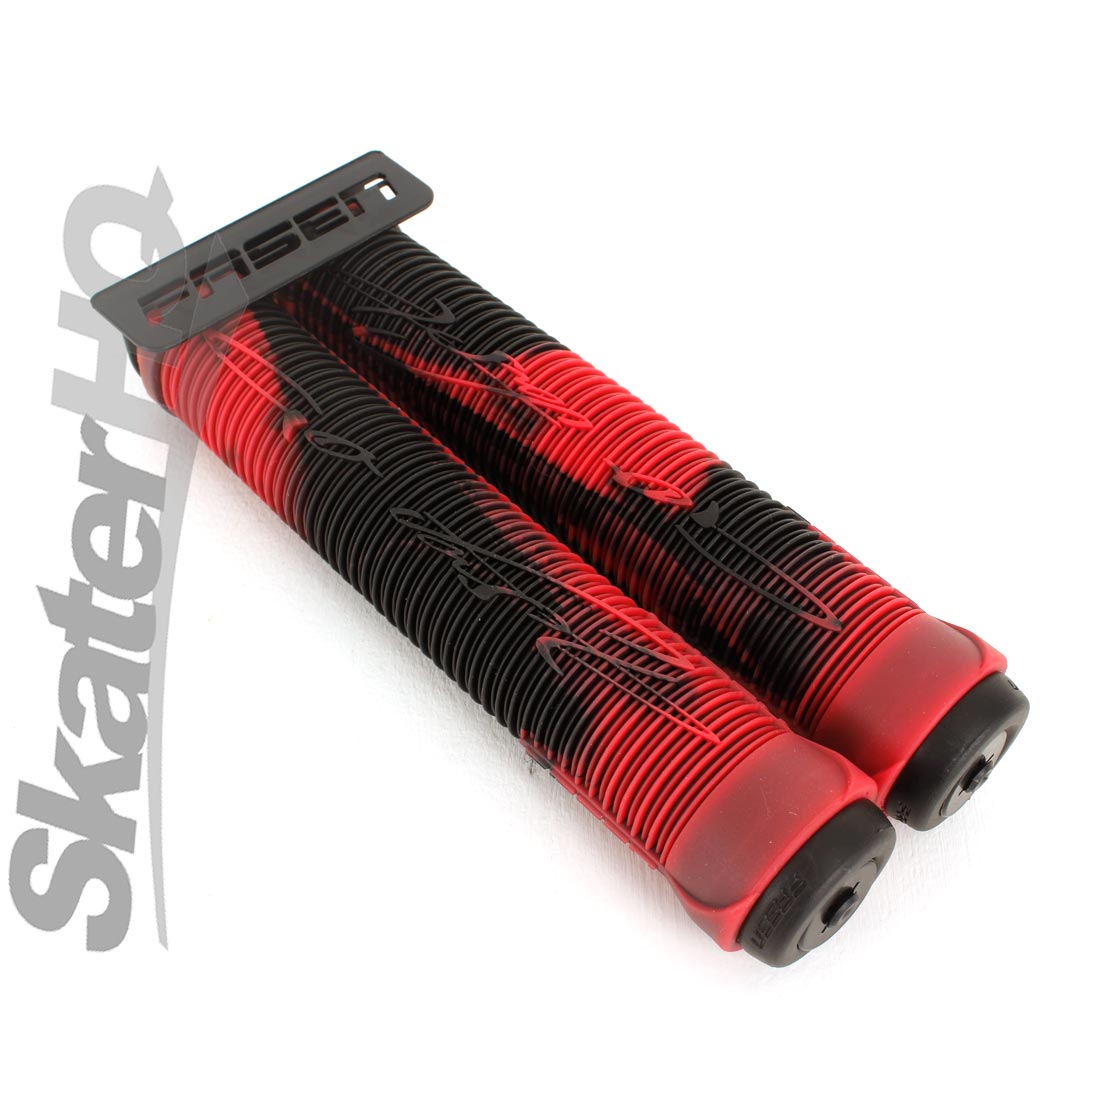 Fasen Go Fast Handle Grips - Black/Red Scooter Grips